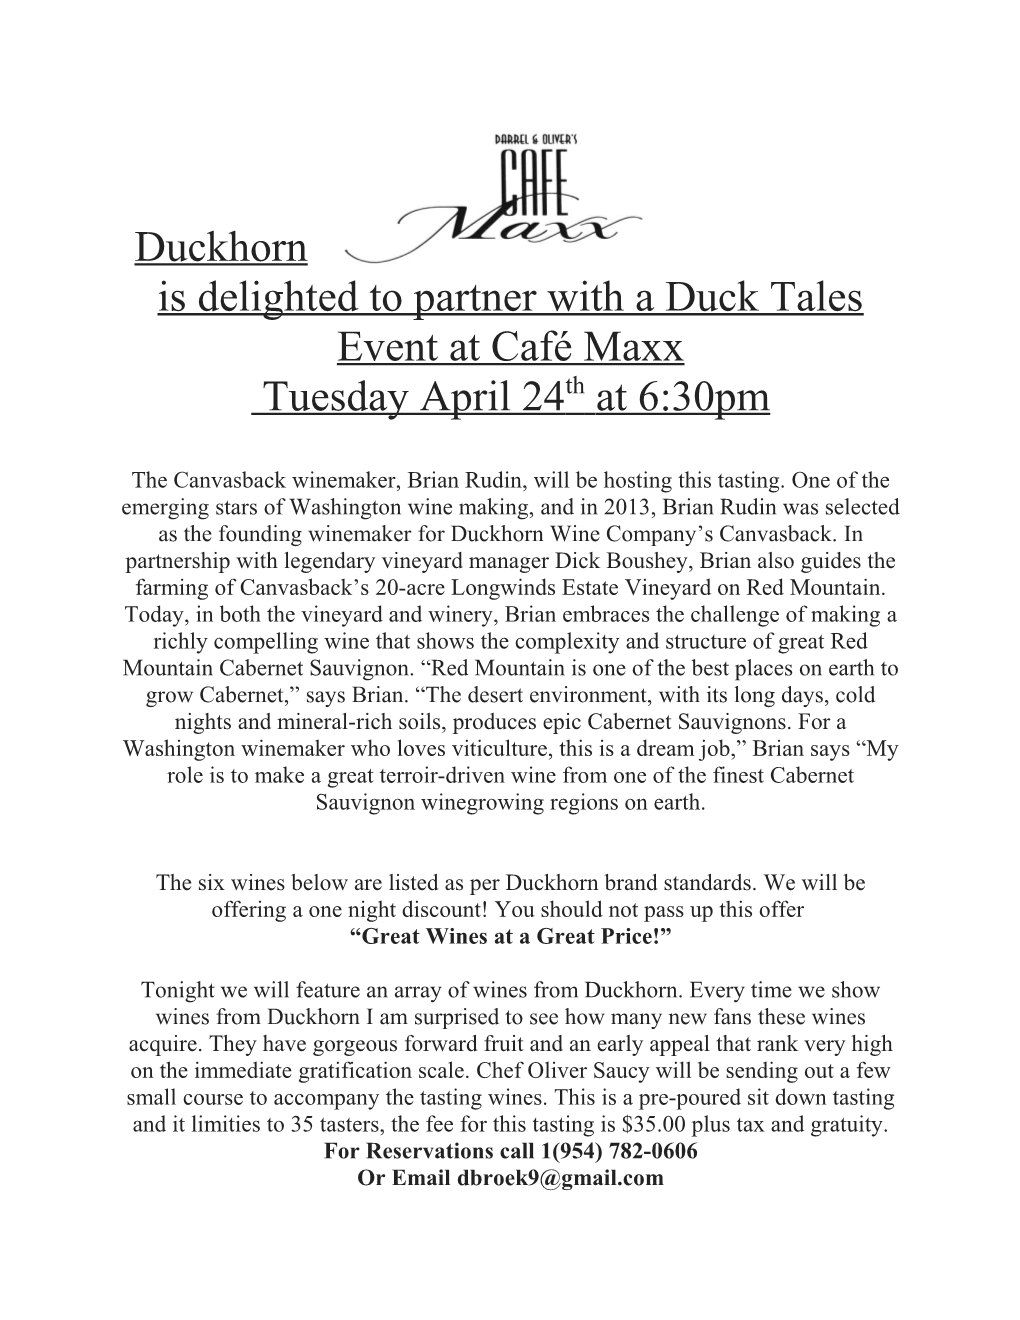 Duckhorn Is Delighted to Partner with a Duck Tales Event at Café Maxx